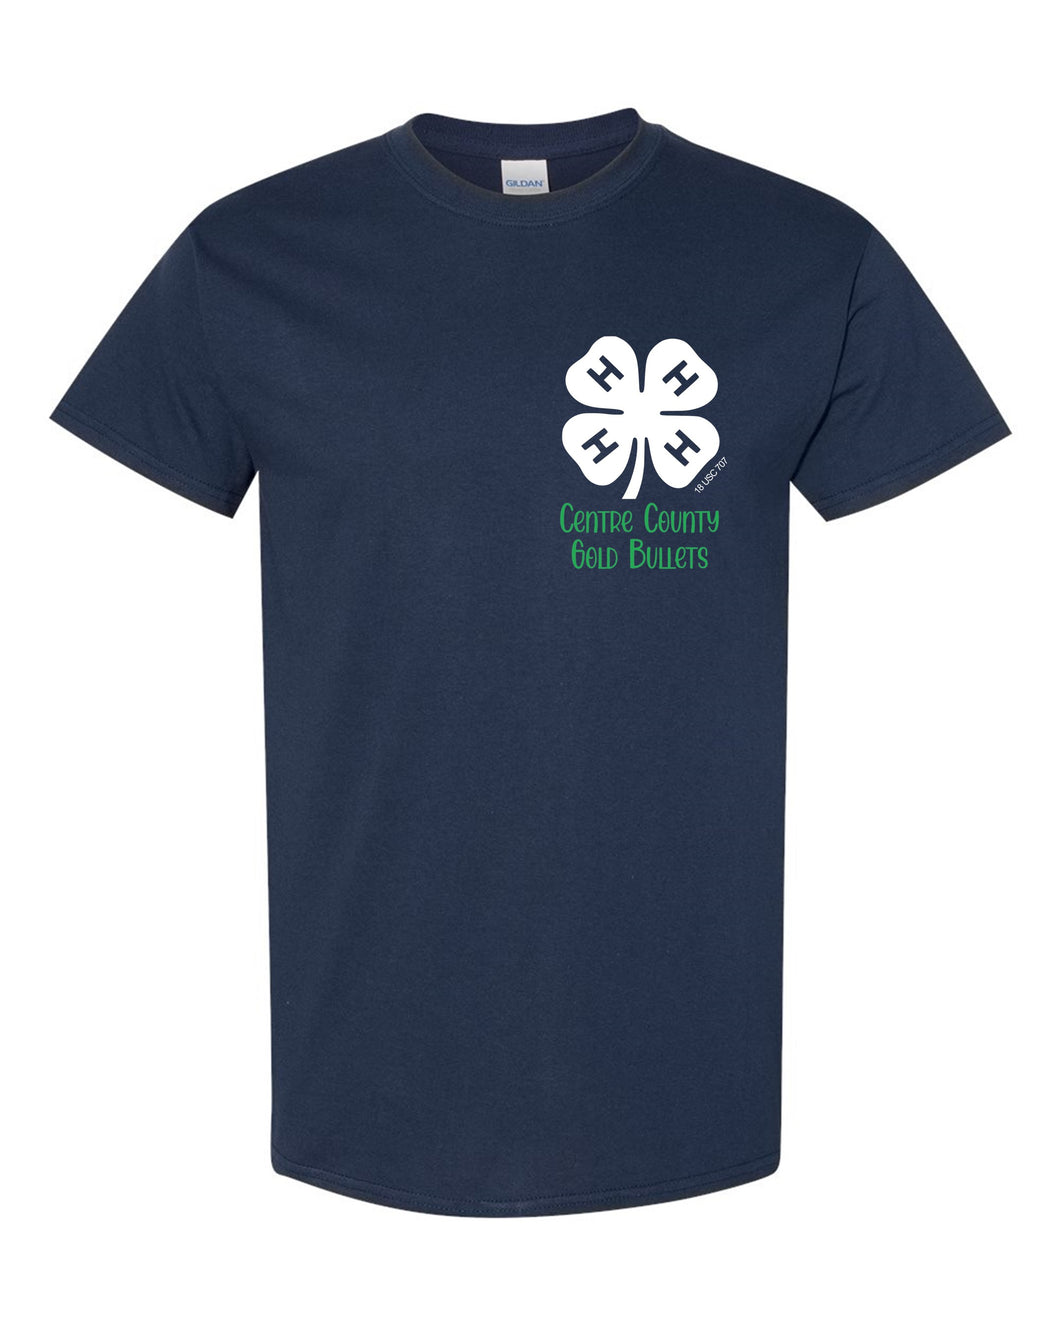 Centre County Gold Bullets 4-H Shirt